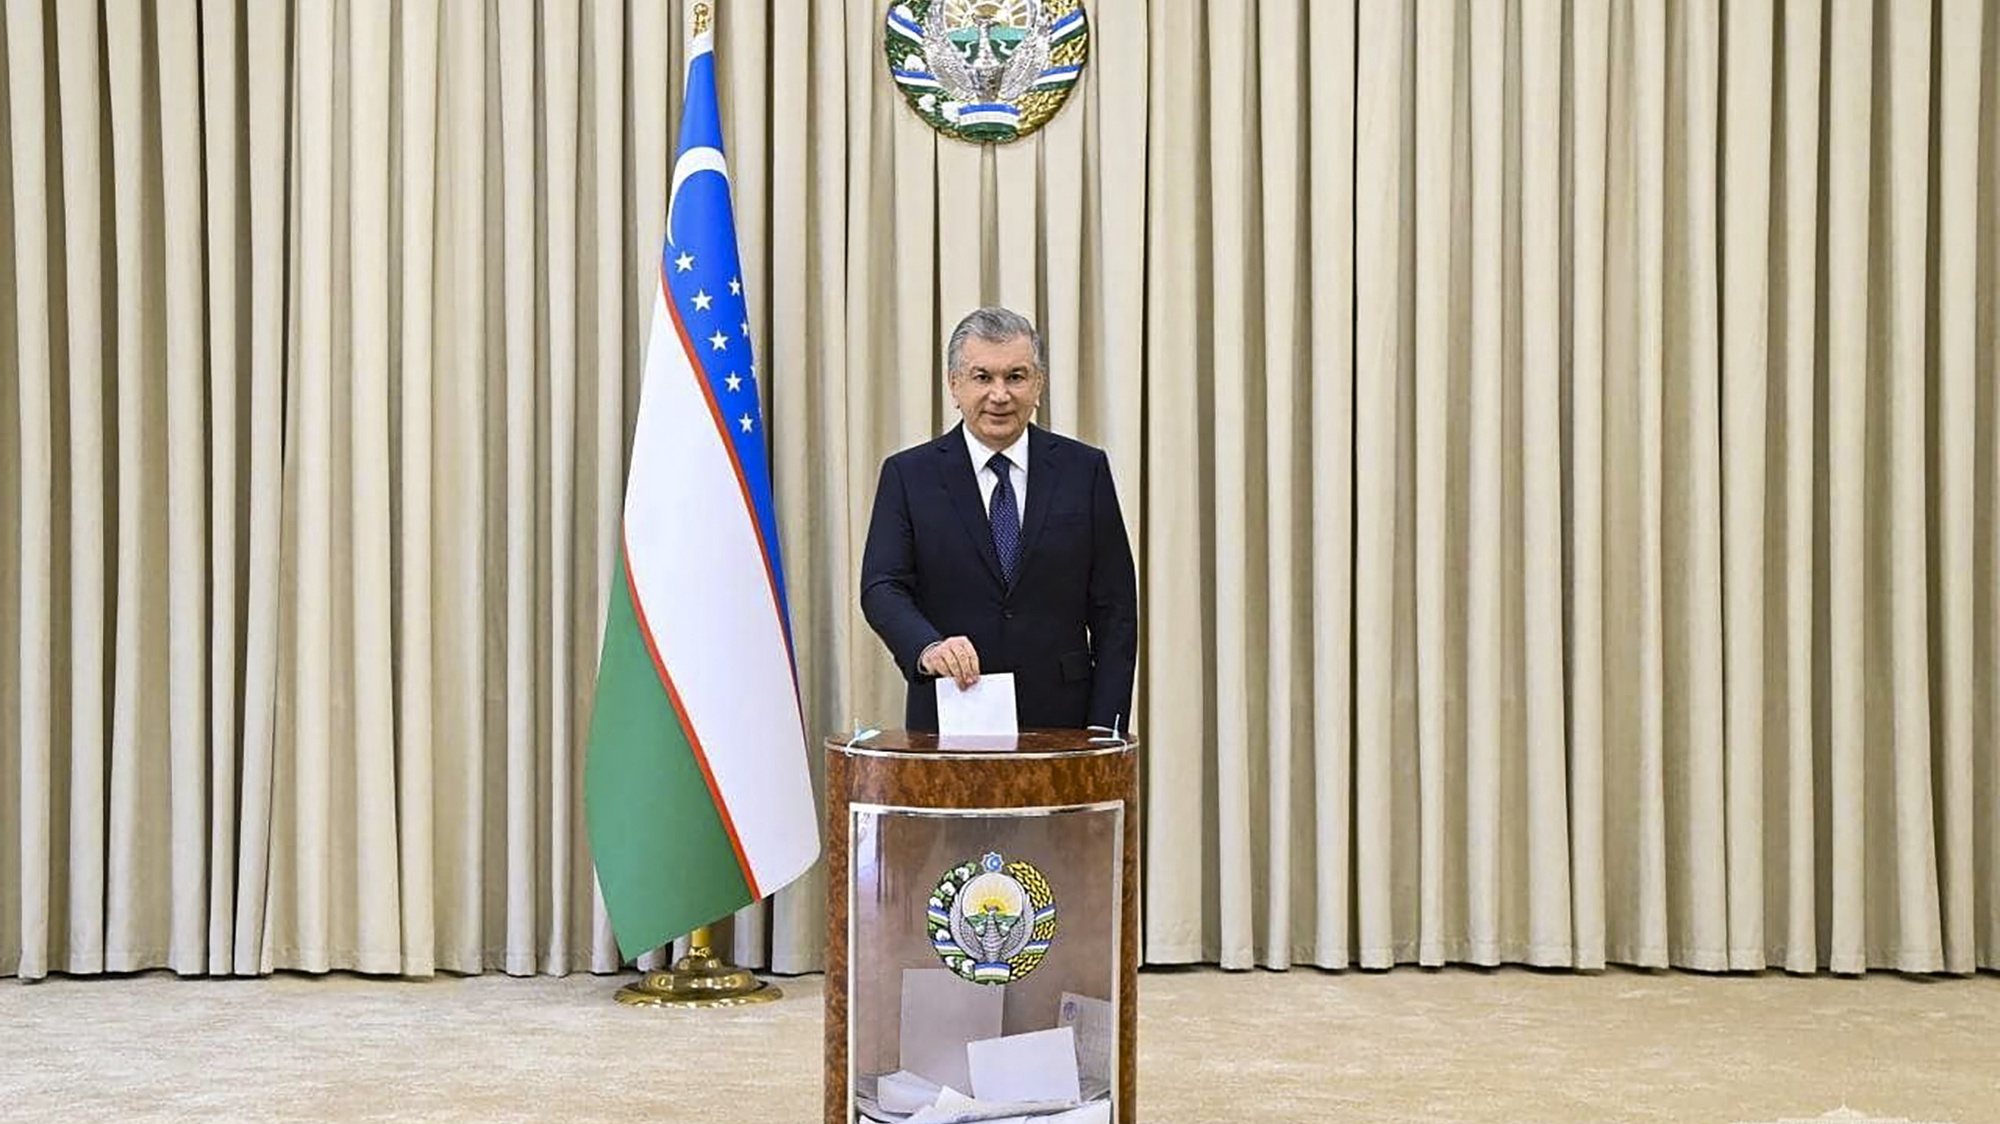 epa09542776 A handout photo made available by Uzbekistan President press service shows Uzbekistan President Shavkat Mirziyoyev casting his vote at Uzbek presidential elections on the polling station in Tashkent, Uzbekistan, 24 October 2021. Incumbent President Mirziyoyev is widely expected to win a second term during elections in which he is facing four candidates. Presidential elections in Uzbekistan are held every five years, and Mirziyoyev won the last held in December 2016 with 88.61 percent of all votes against his three rivals.  EPA/UZBEKISTAN PRESIDENT PRESS SERVICE HANDOUT  HANDOUT EDITORIAL USE ONLY/NO SALES